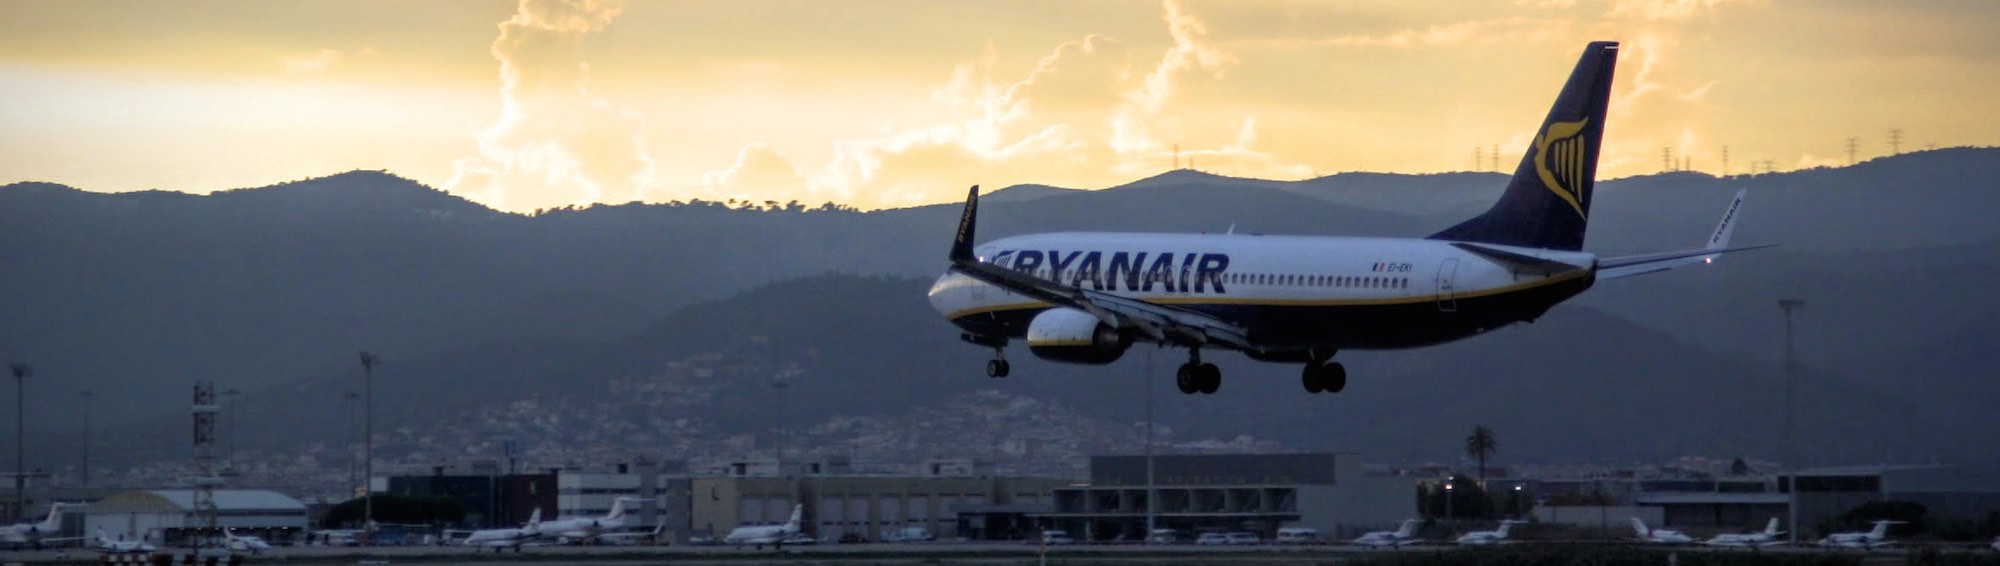 Best time to book flights for London (STN) to Alicante (ALC) flights with Ryanair at AirHint